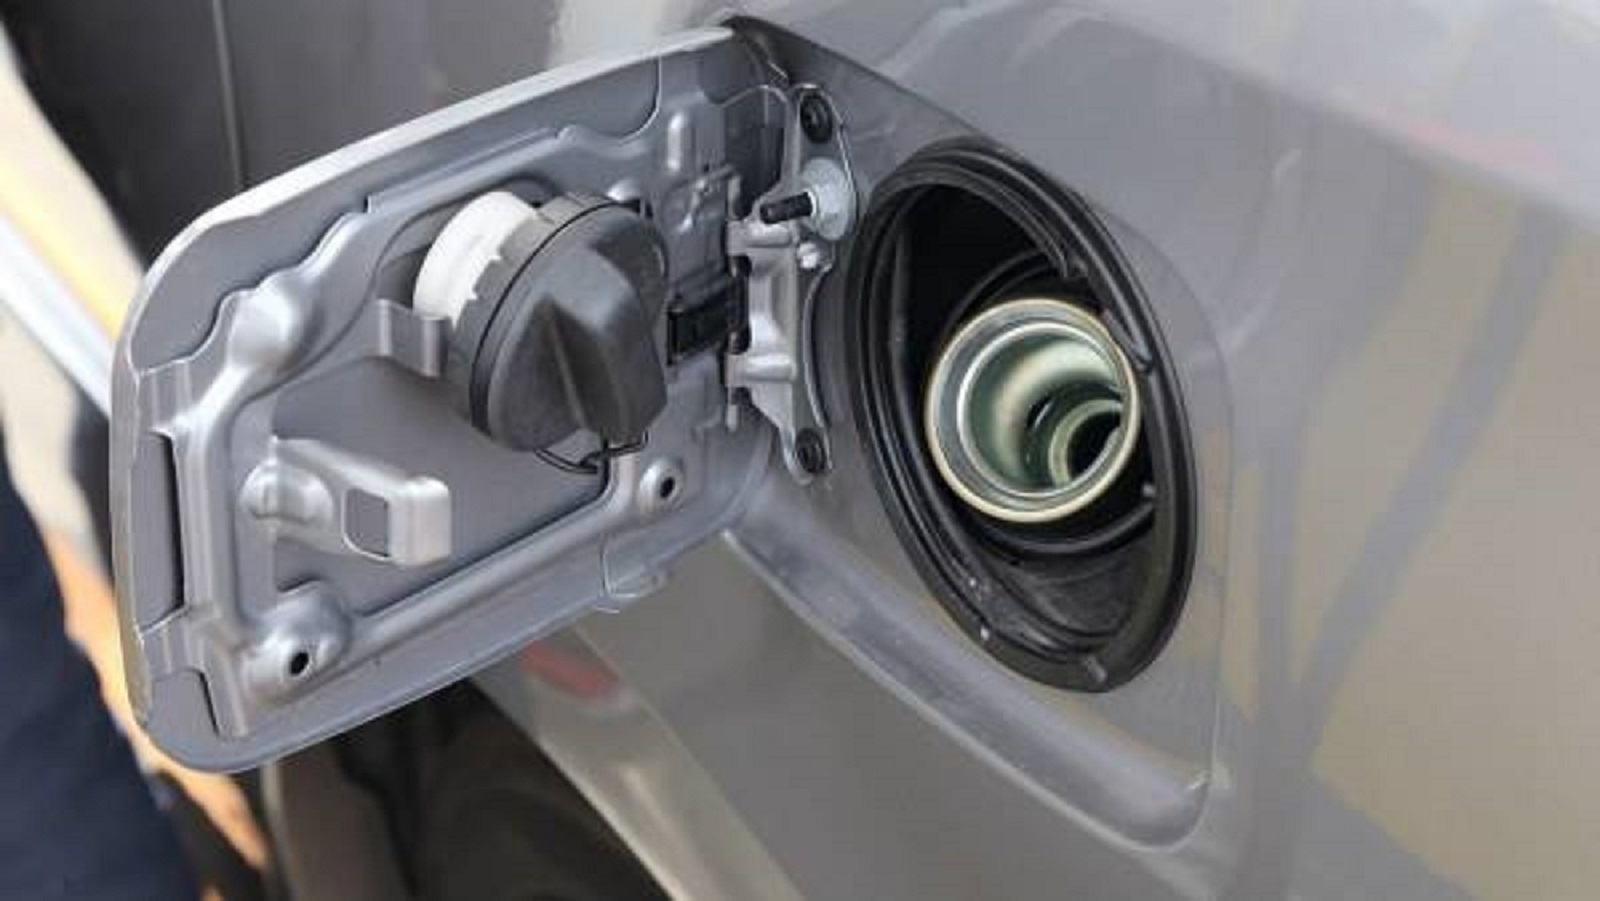 Treat the water entering the car’s gas tank in this way to avoid losing large sums of money